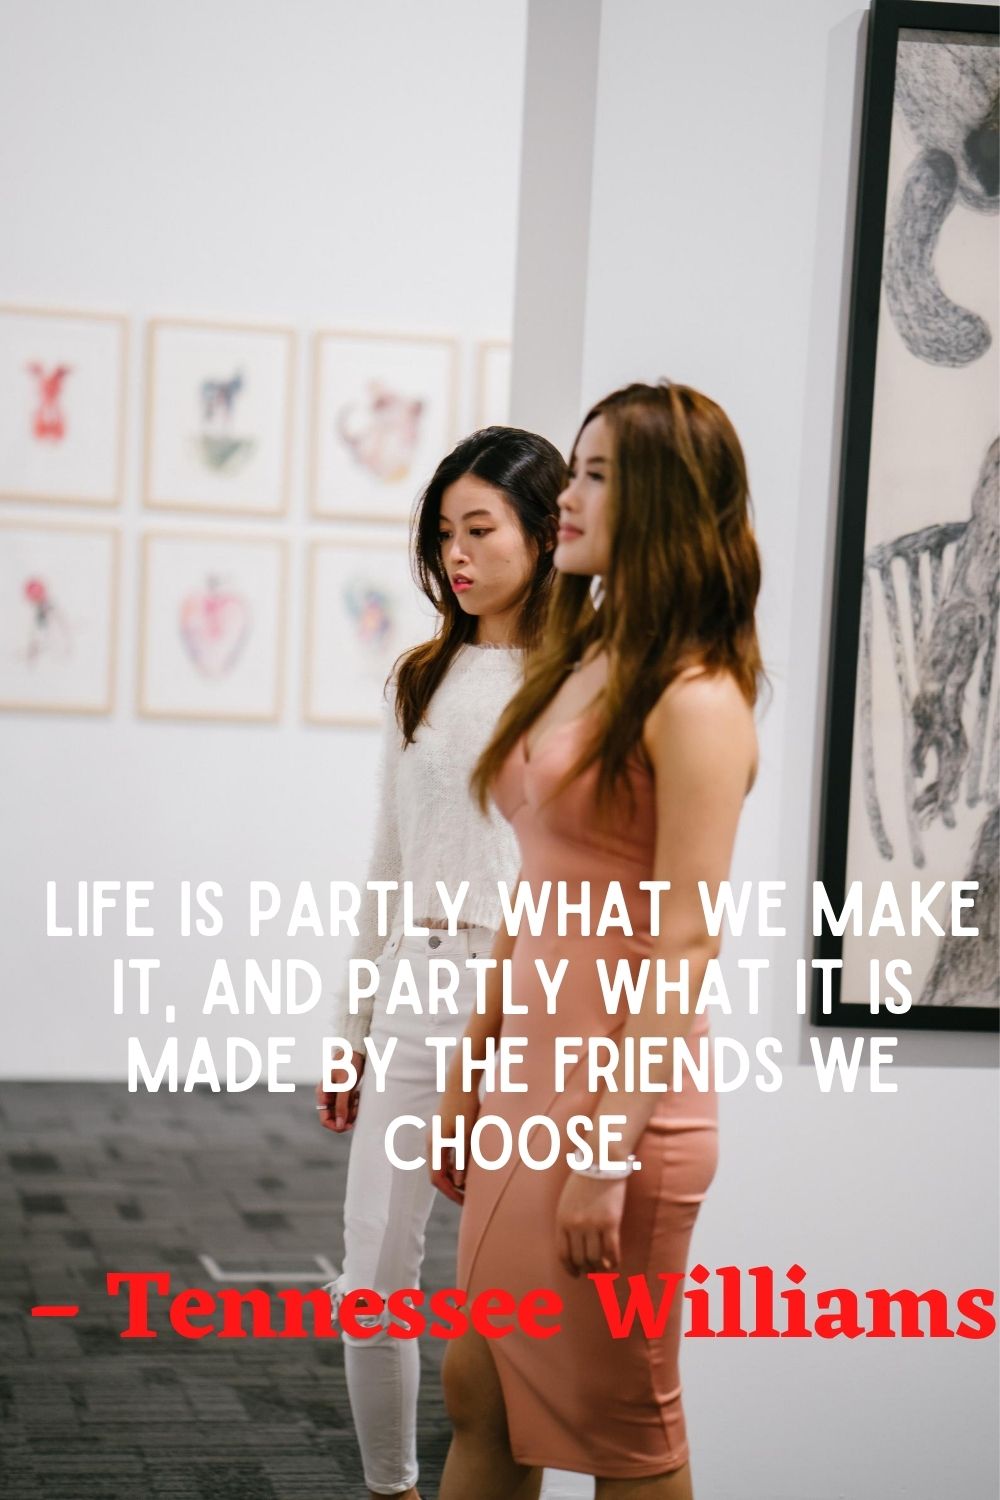 Life is partly what we make it and partly what it is made by the friends we choose.” – Tennessee Williams